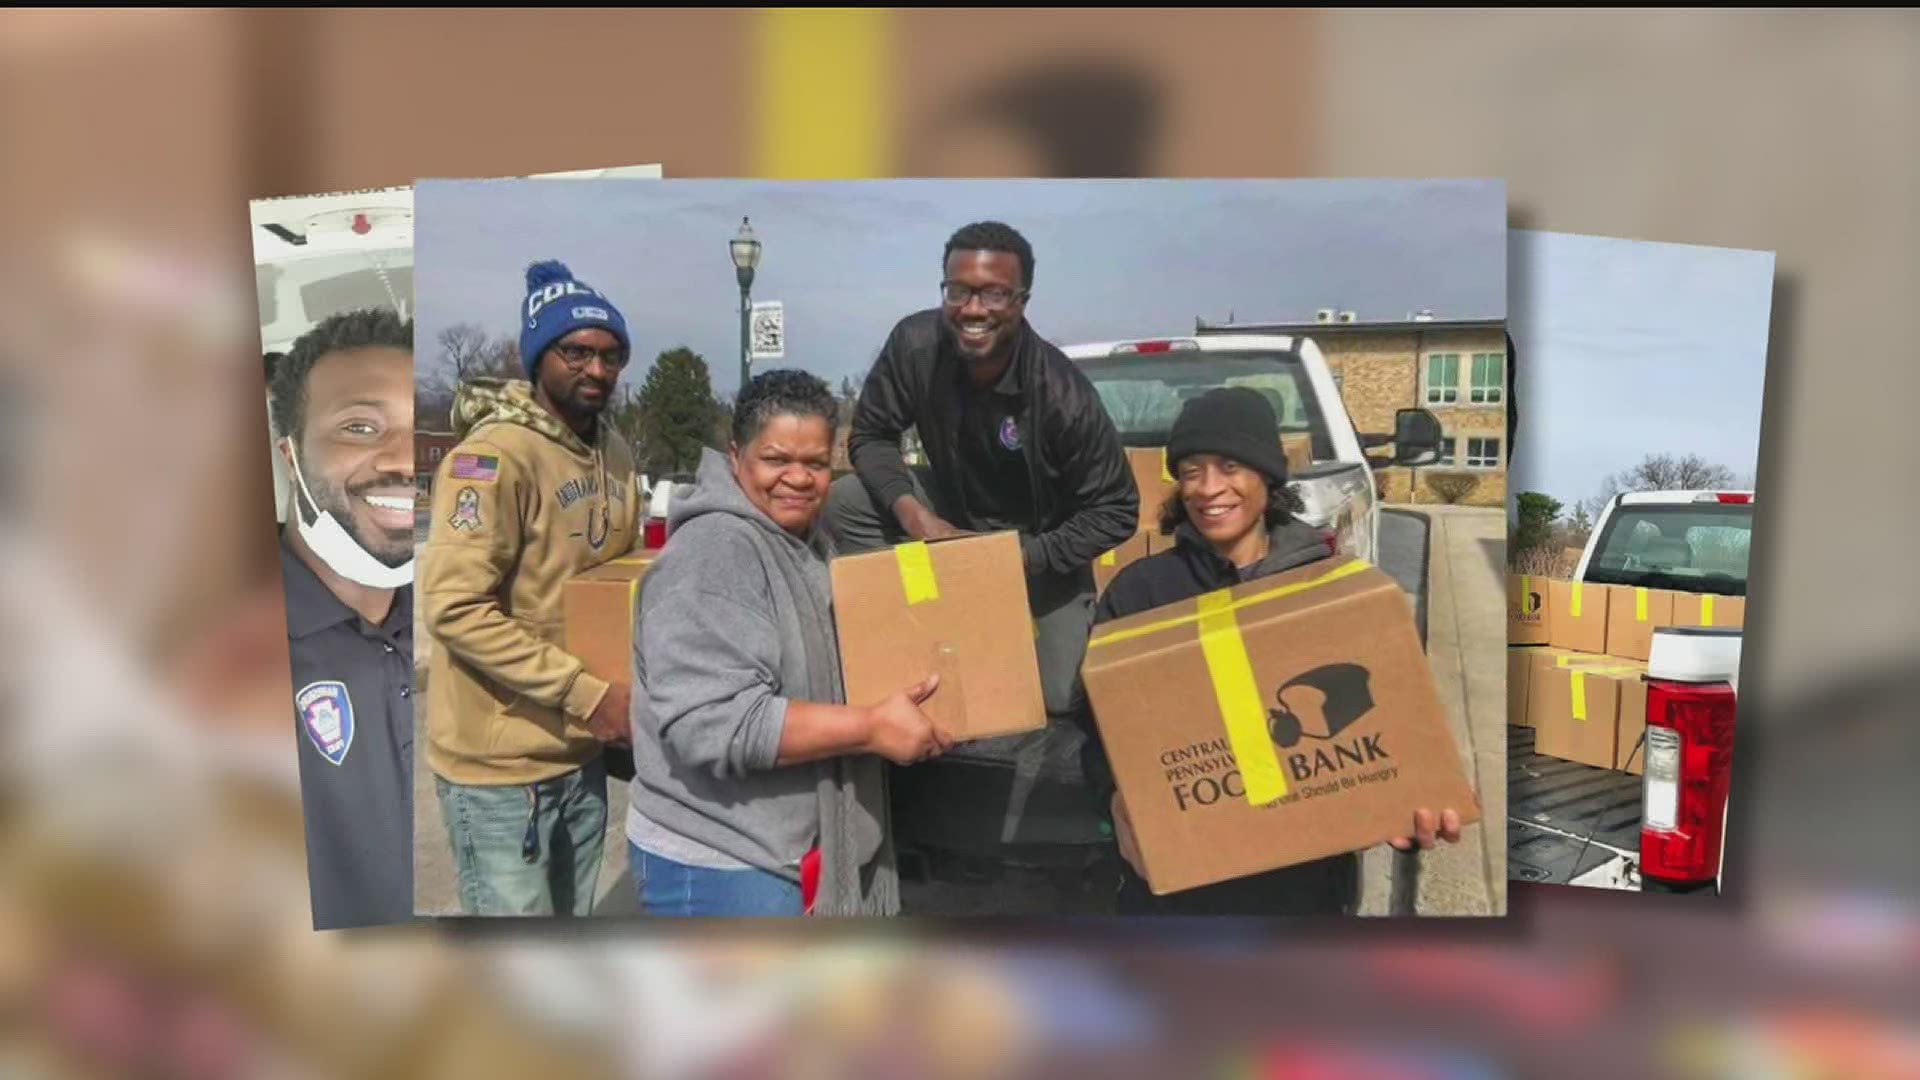 The partnership started after the Harrisburg School District had to close due to the COVID-19 pandemic, leaving many families potentially without meals.